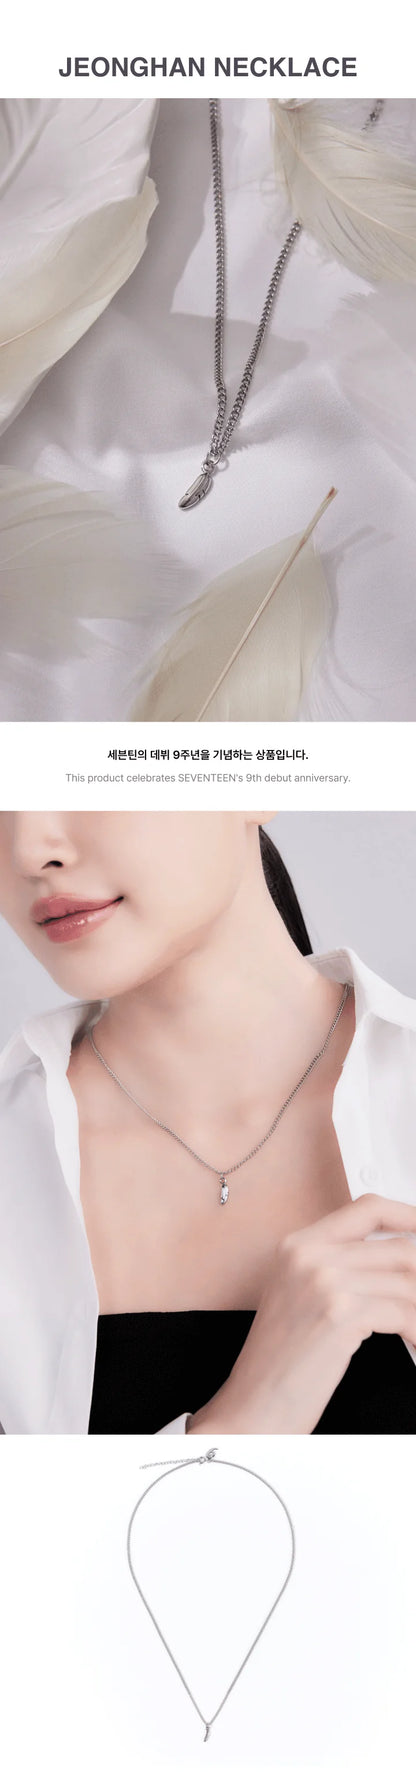 [PRE ORDER] SEVENTEEN - 9TH ANNIVERSARY (Official MD)  NECKLACE : JEONGHAN